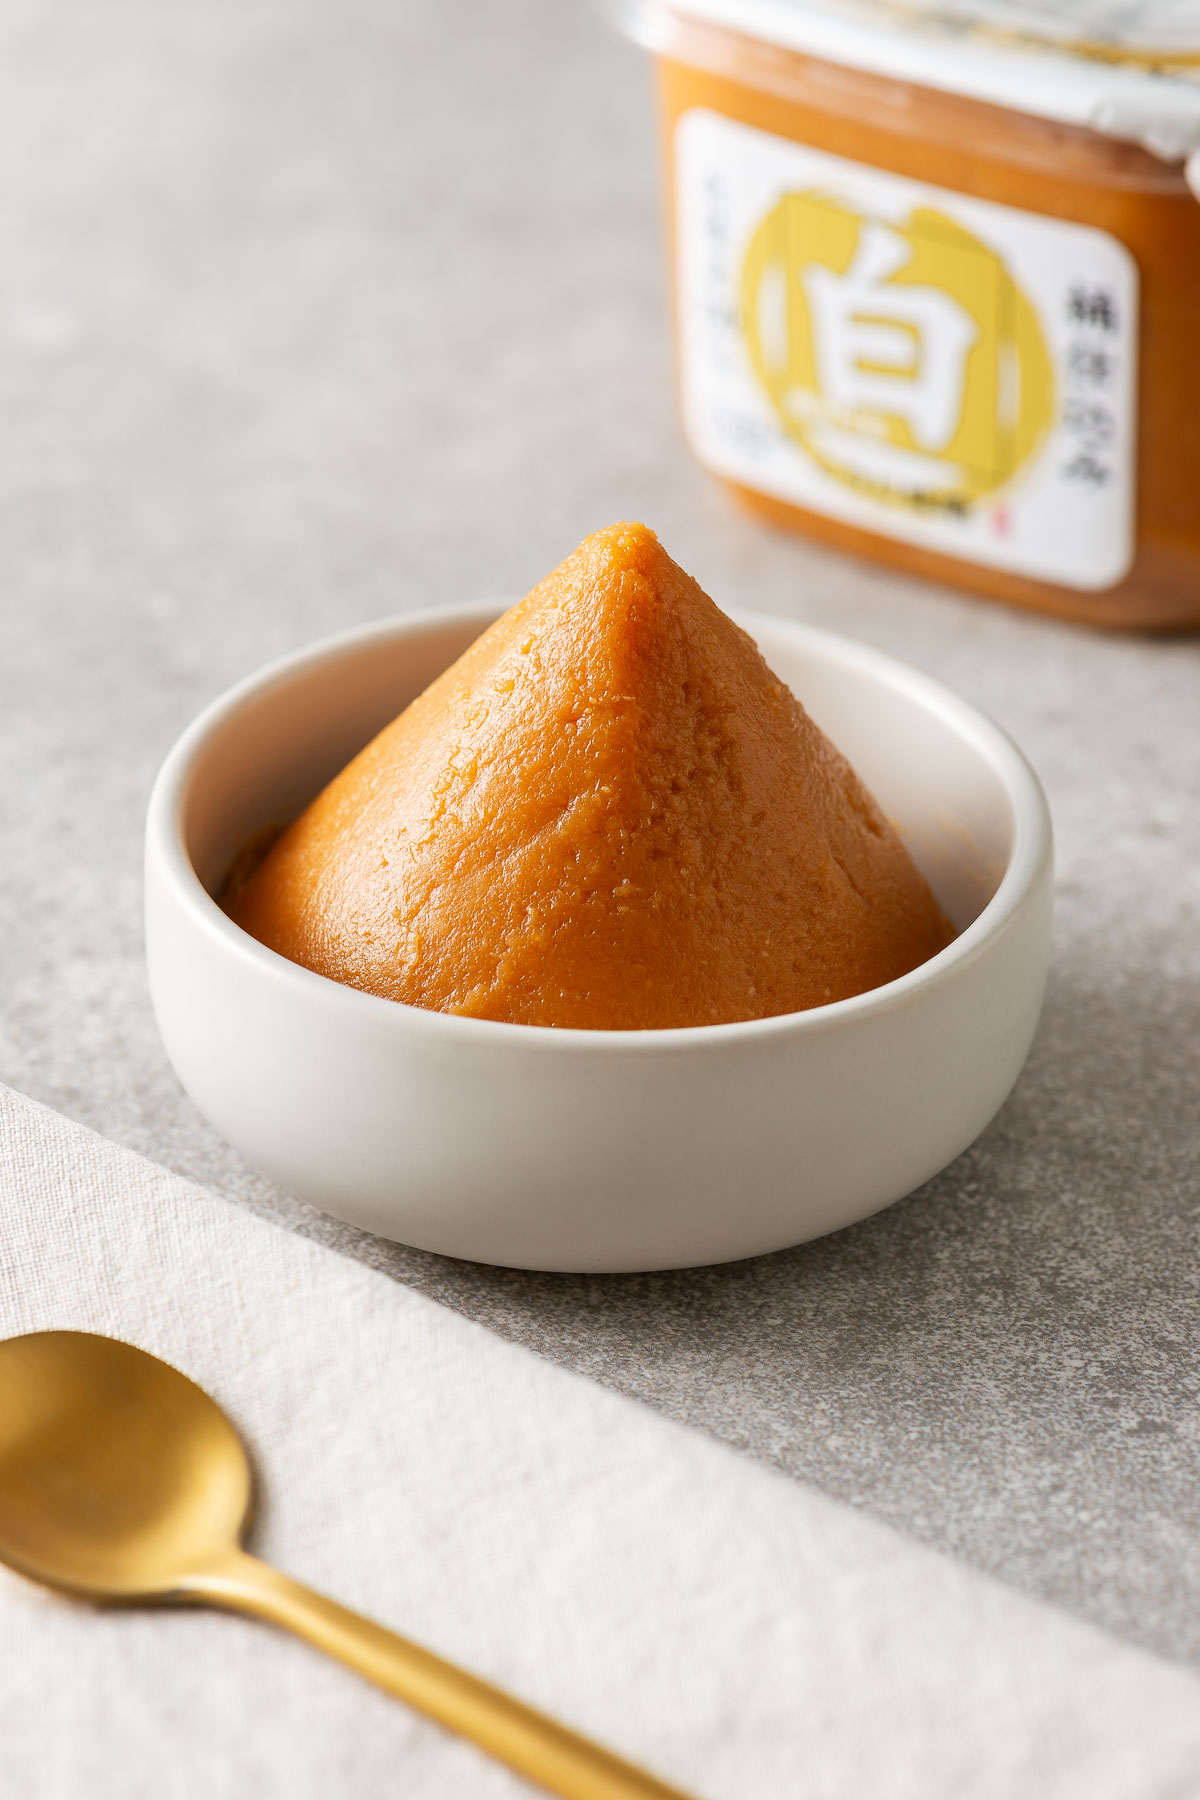 Whit miso paste shaped into a triangle in a small white bowl next to a tub of white miso paste.